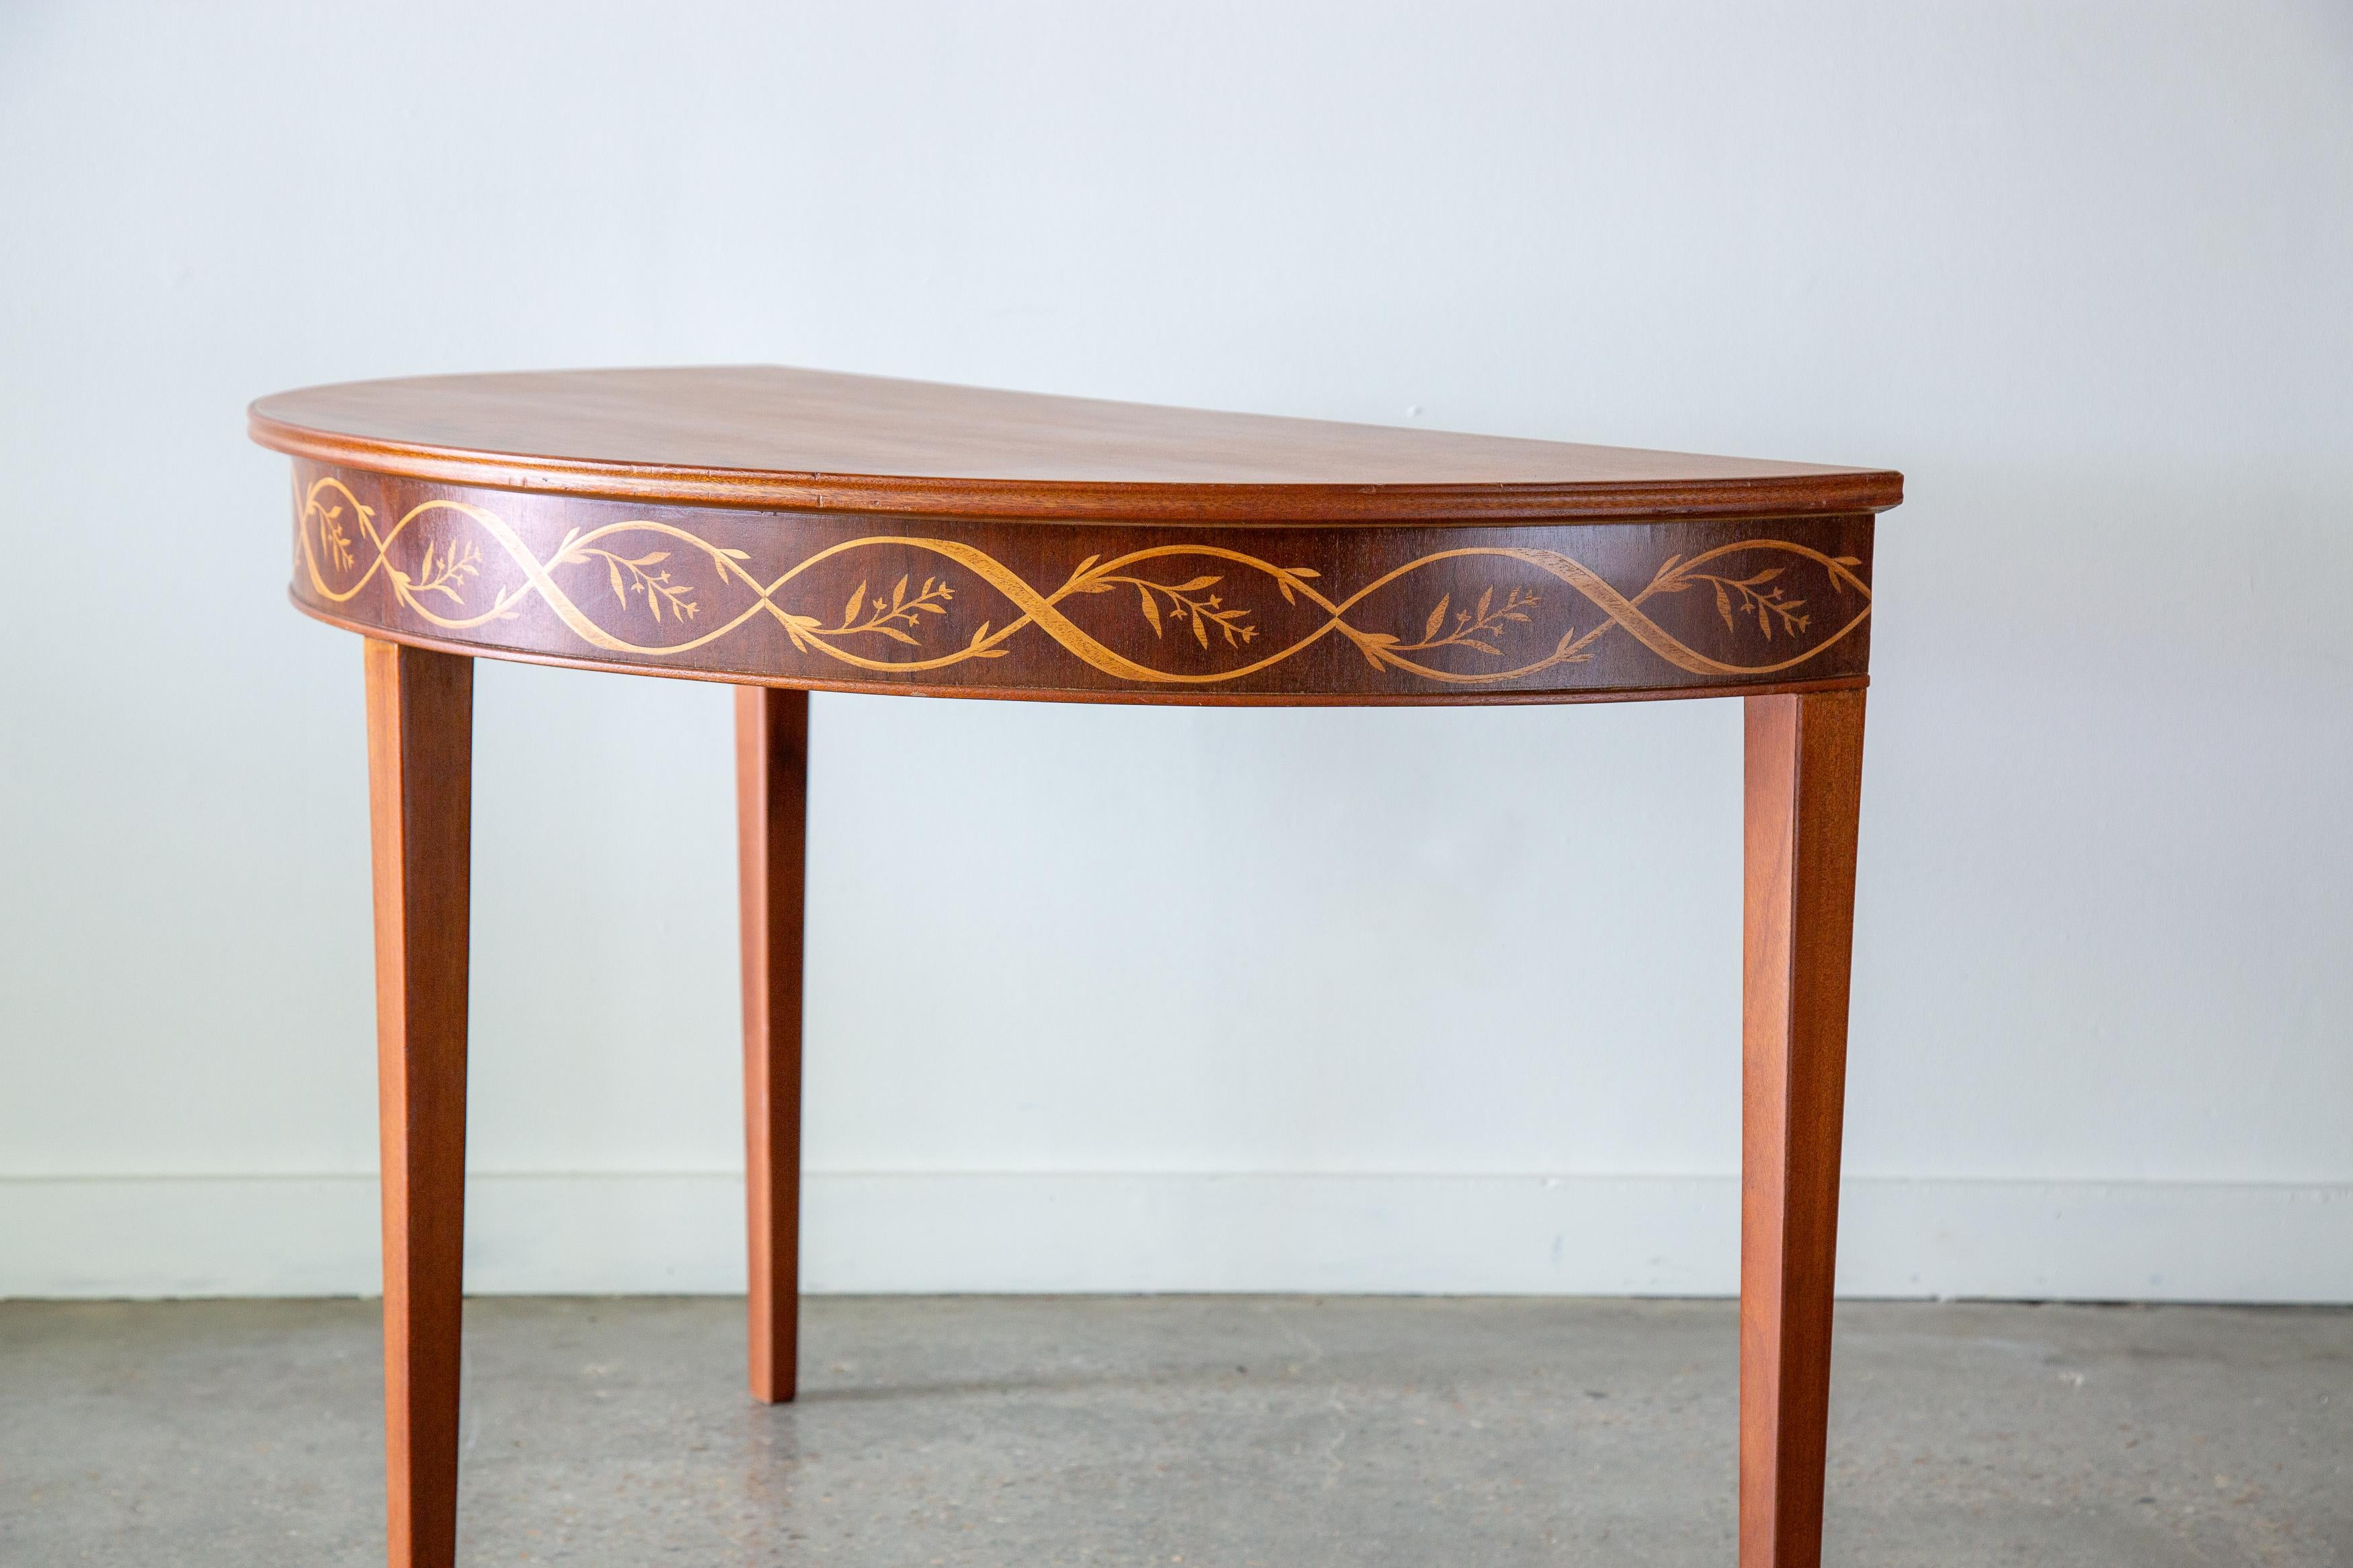 A mahogany demilune table designed by Carl malmsten. Circa 1950s Sweden. Intricate interlaced birch and rosewood veneers sweep the outer edges of the table. Contrasting and complimenting wood species provide great visual affect. Priced per table.